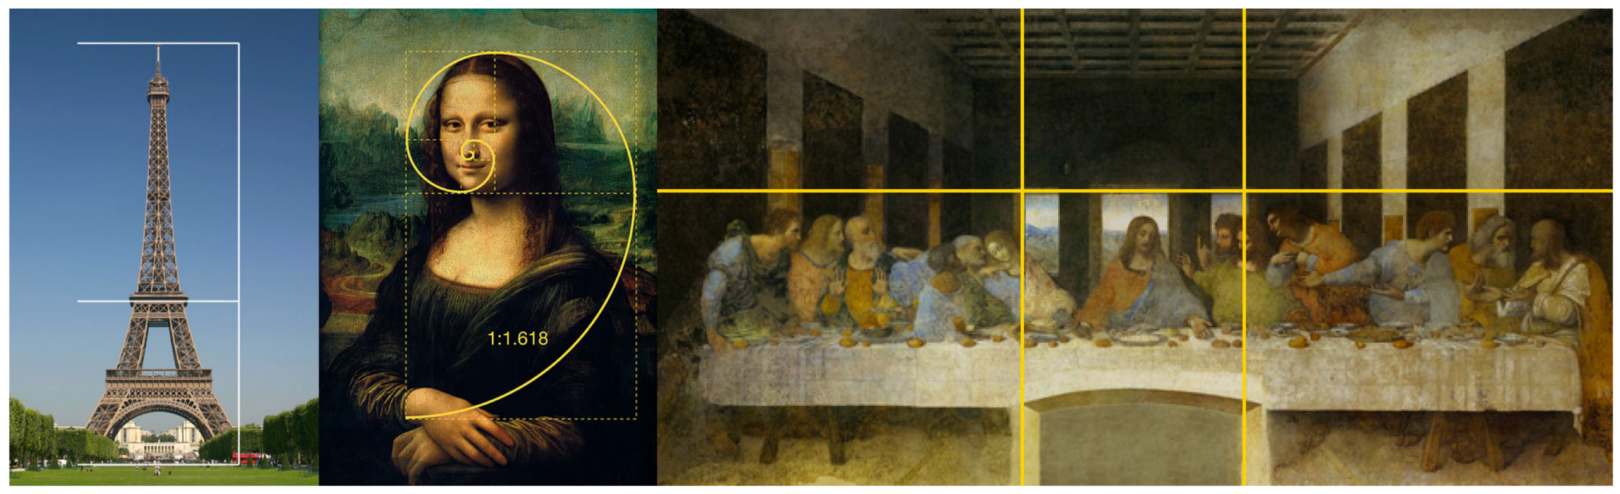 Objects in design of Golden Ratio